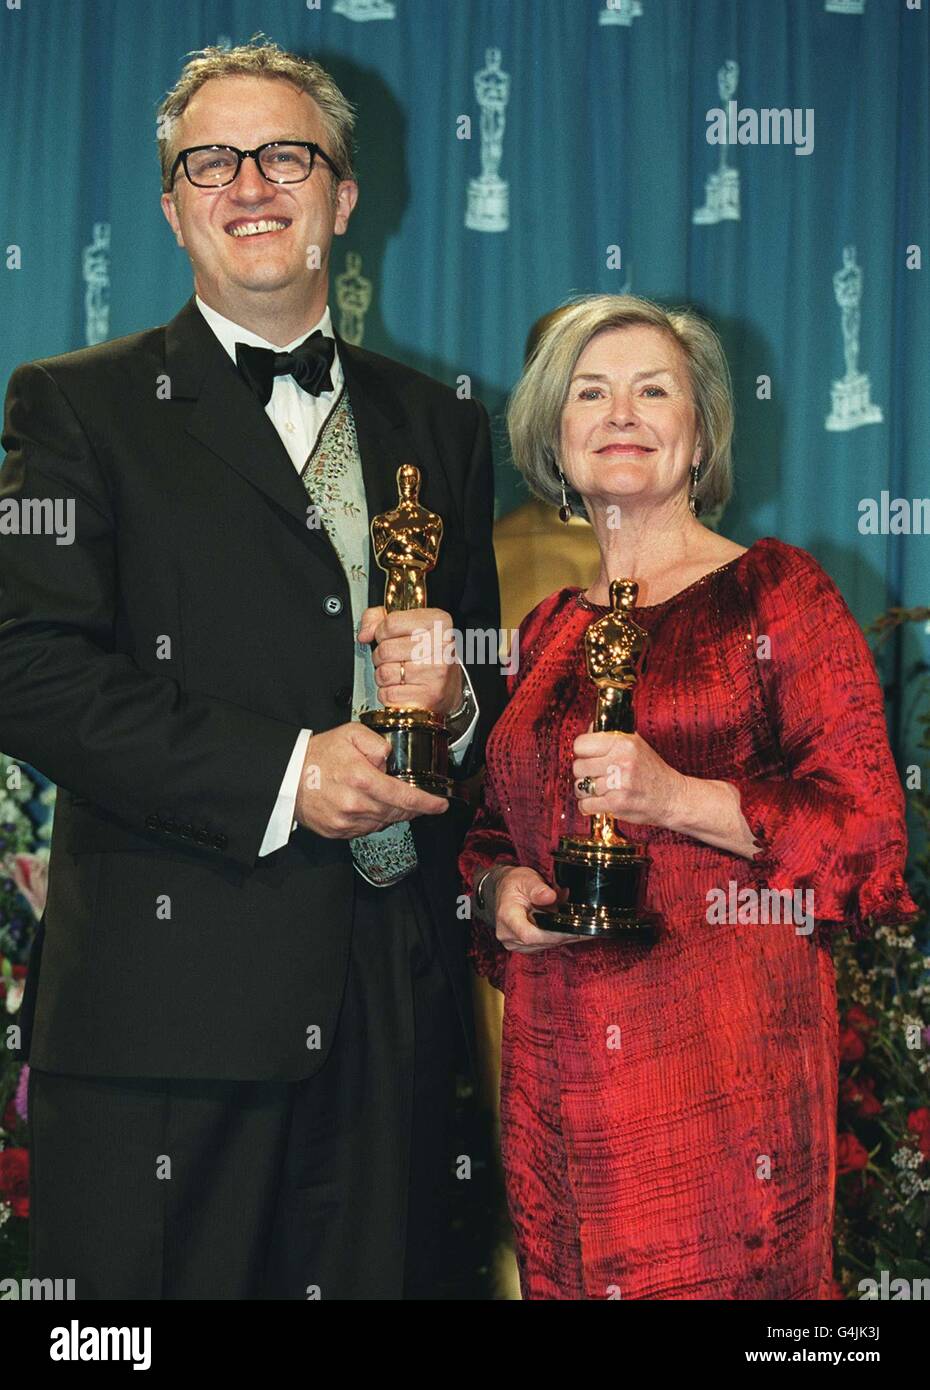 Martin Child and Jill Quertier with their Oscars, which they won for Best Art Direction for their work on the film 'Shakespeare in Love', at the 71st annual Academy Awards in Los Angeles. Stock Photo